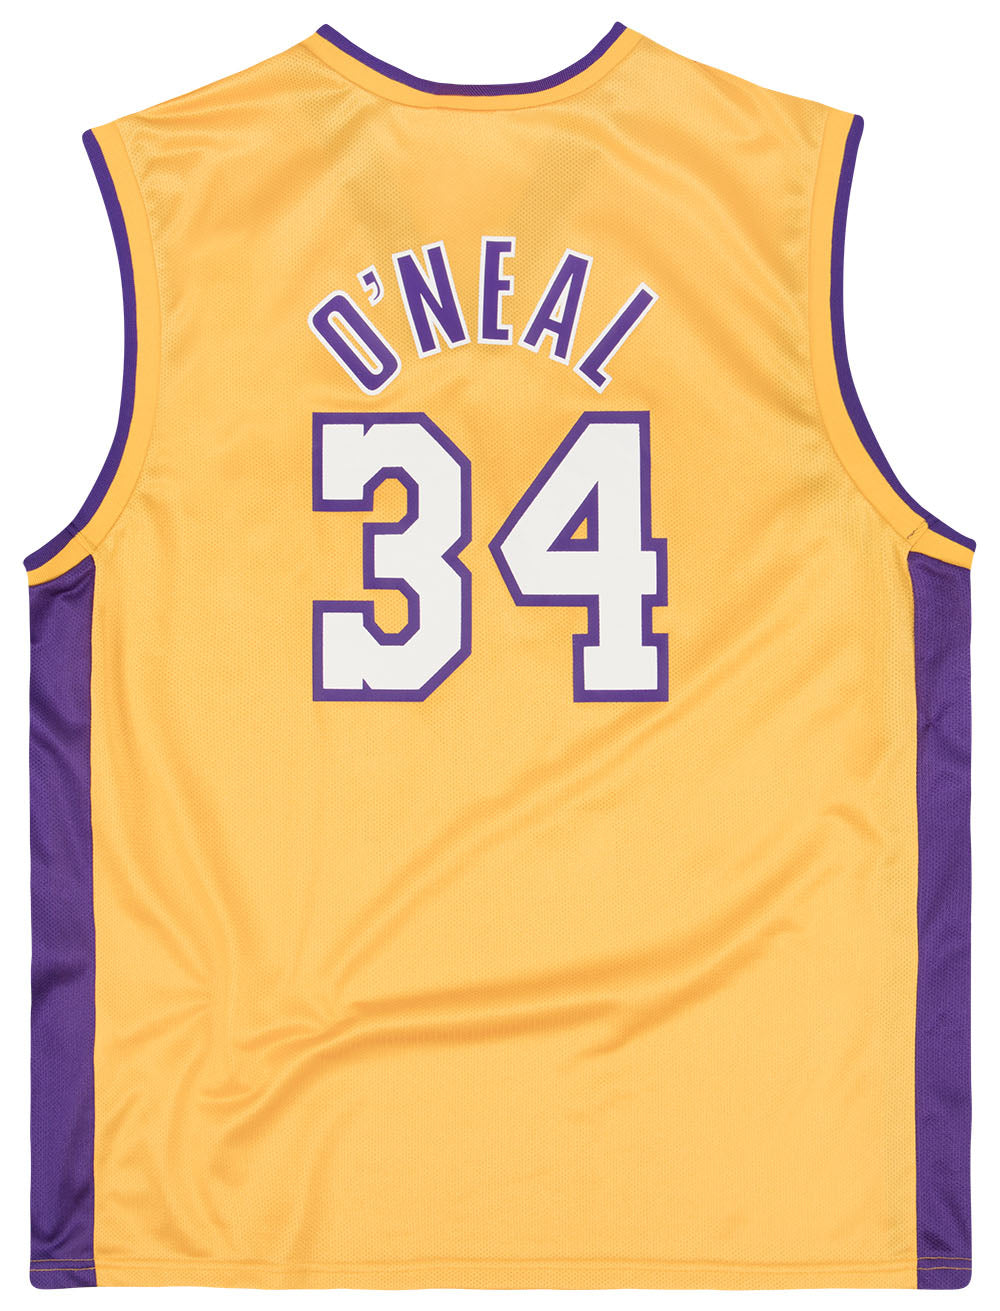 Los Angeles Lakers O'Neal Jersey Free Shipping - The Vintage Twin